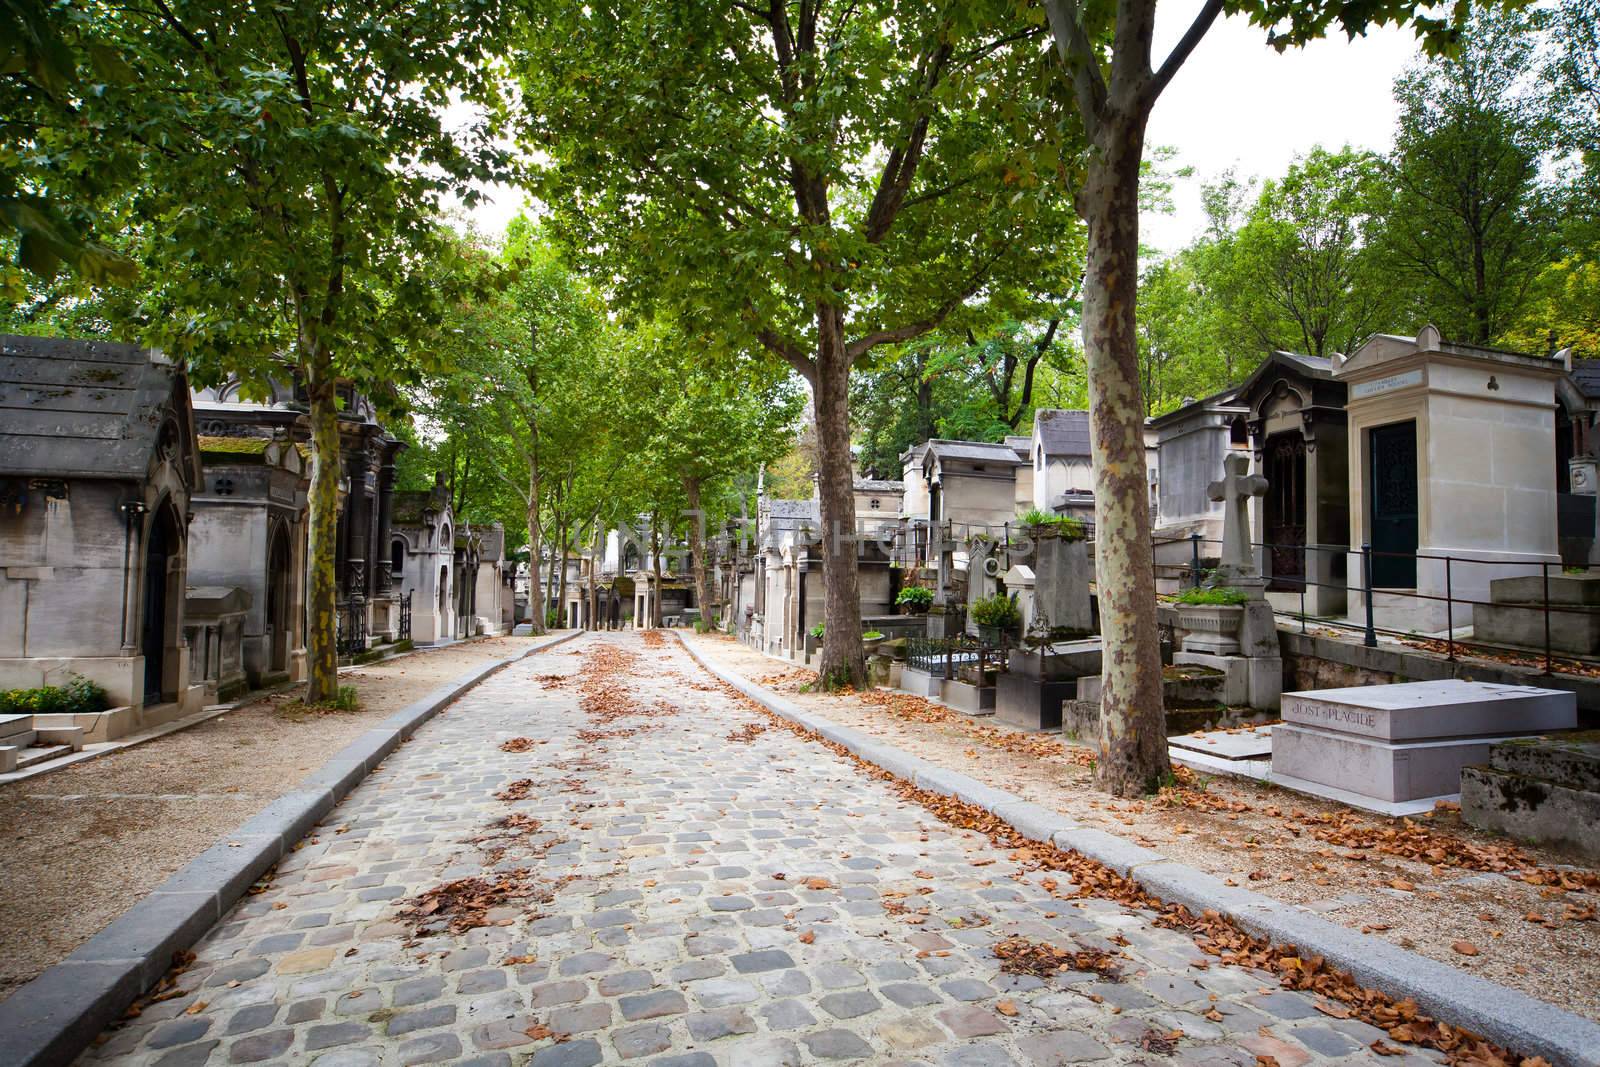 The most famous cemetery in Paris - Pere Lachaise